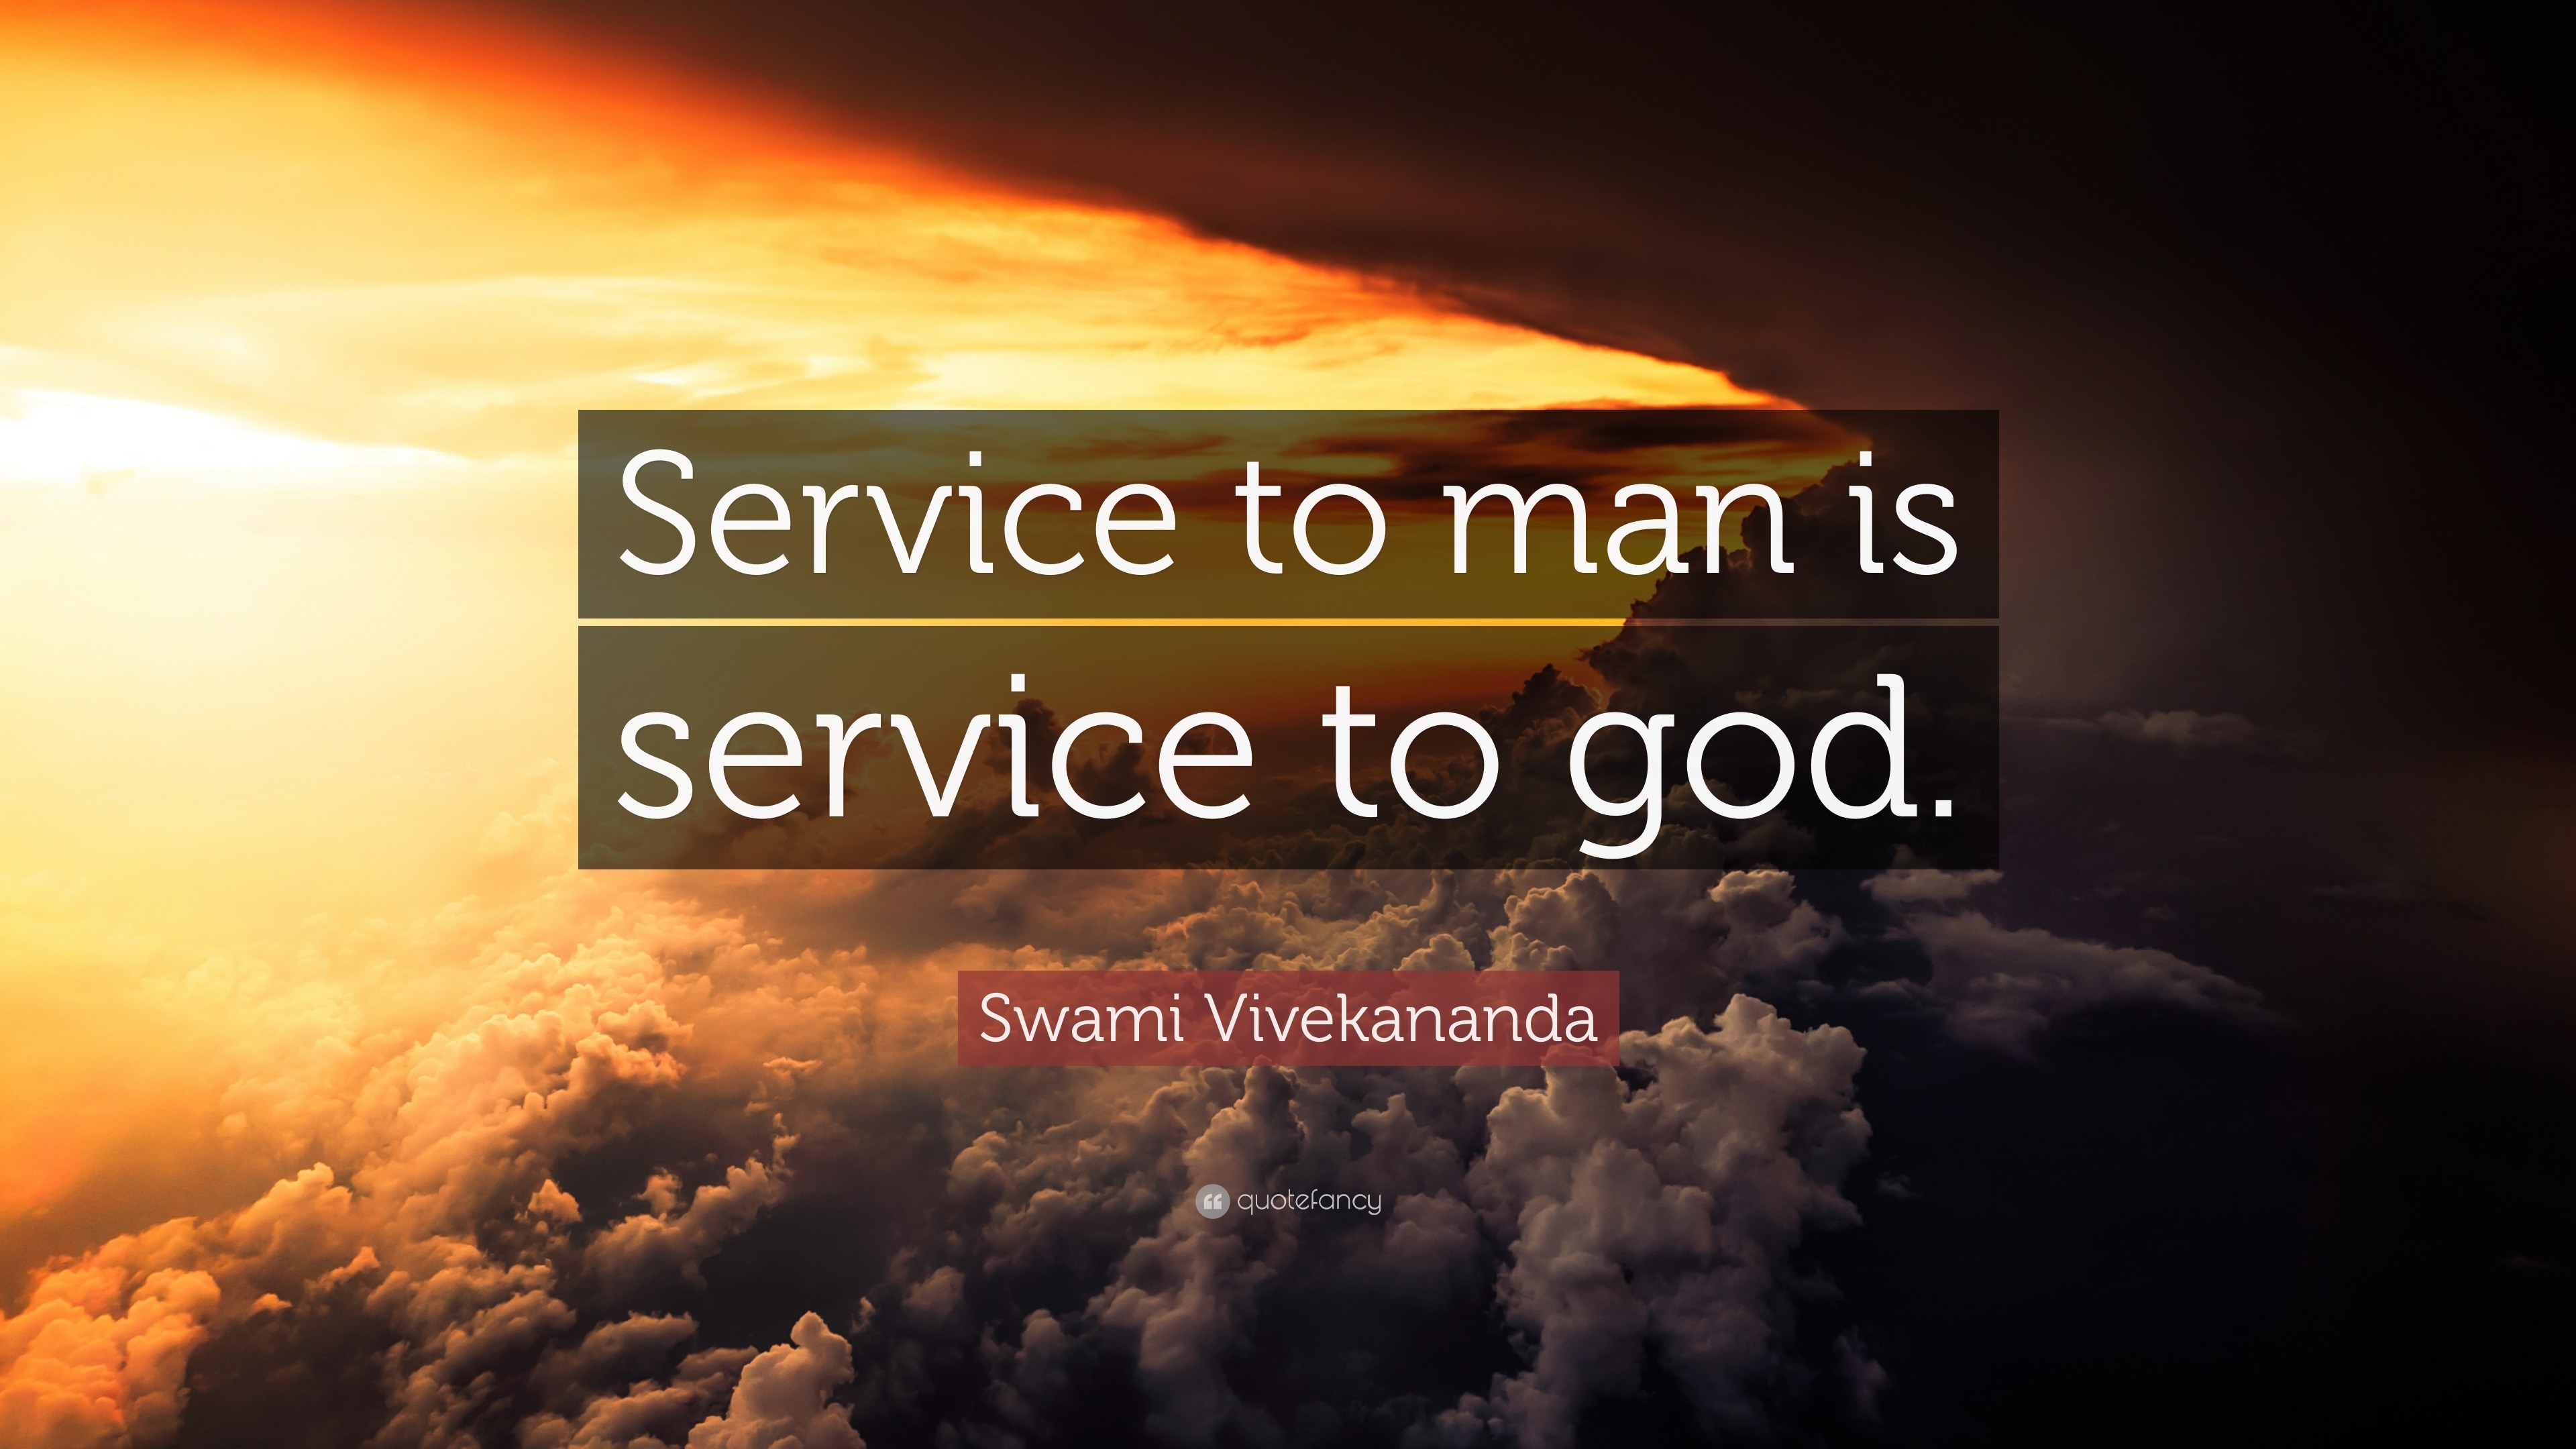 Essay service to man is service to god